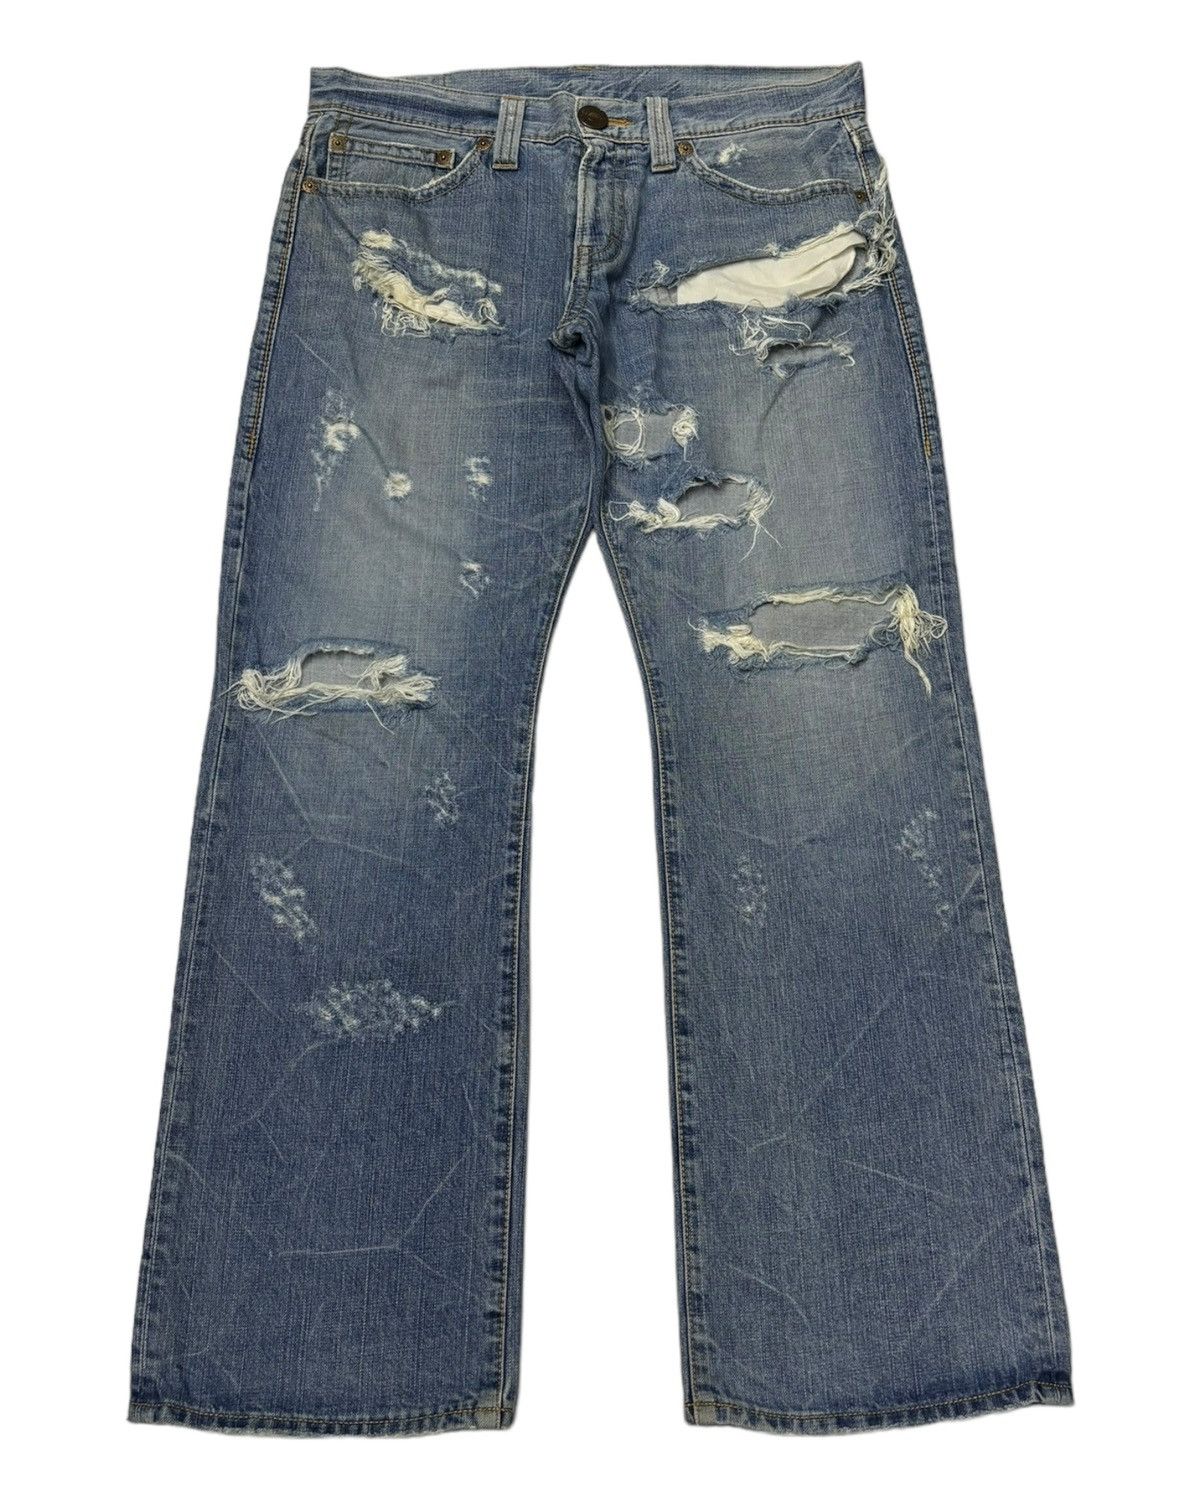 Archival Clothing - VINTAGE CO&LU THRASHED DISTRESS RIPS BAGGY FLARE JEANS - 1